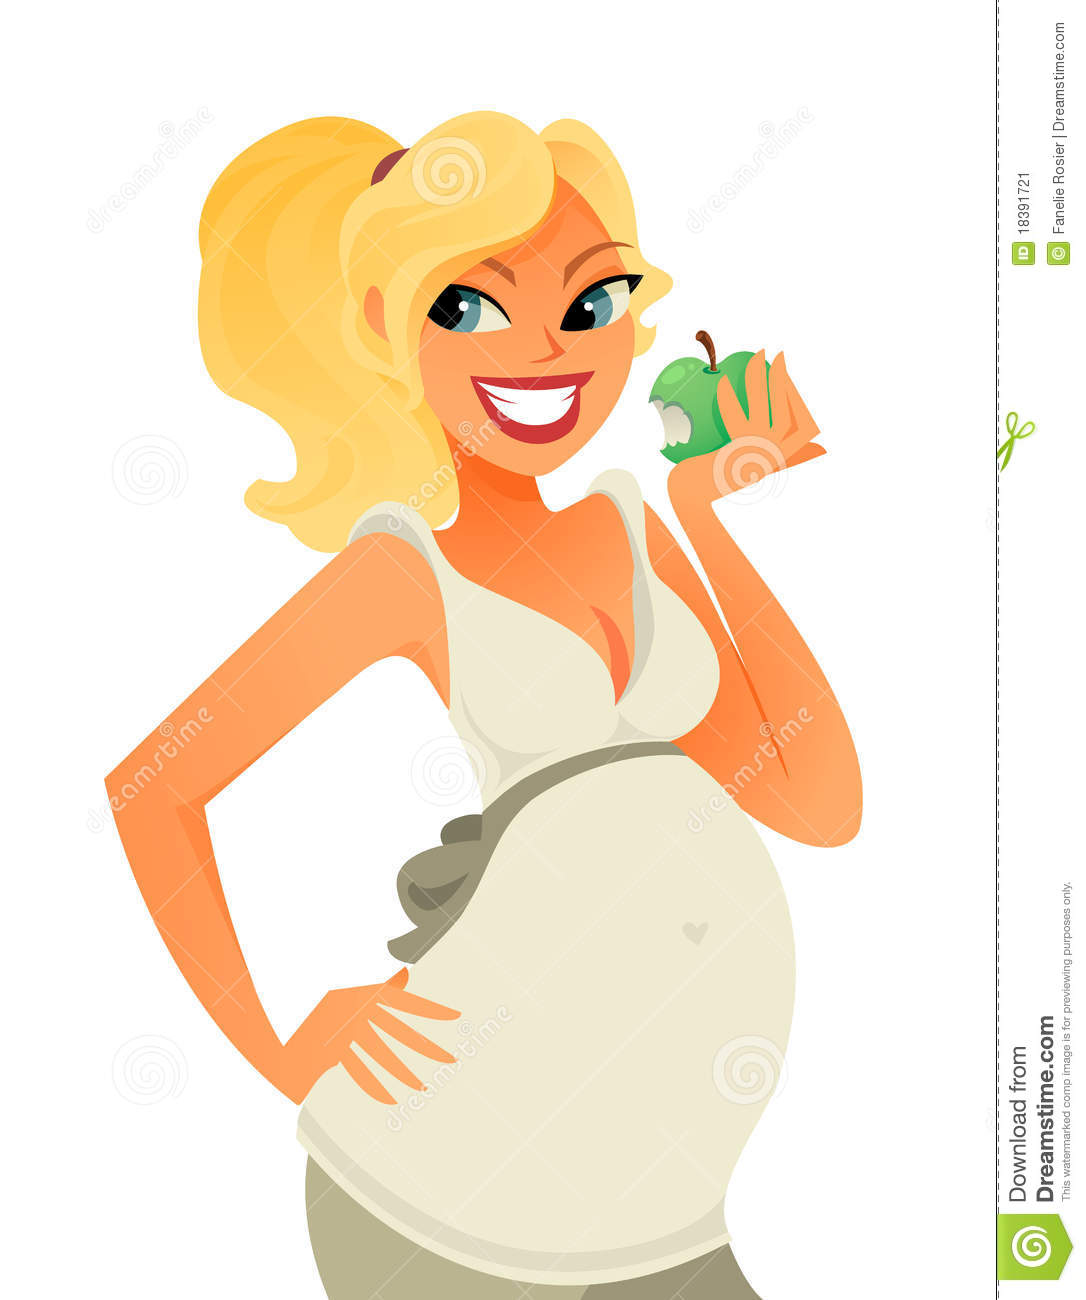 Pregnant Eating Apple Vector Stock Image   Image  18391721